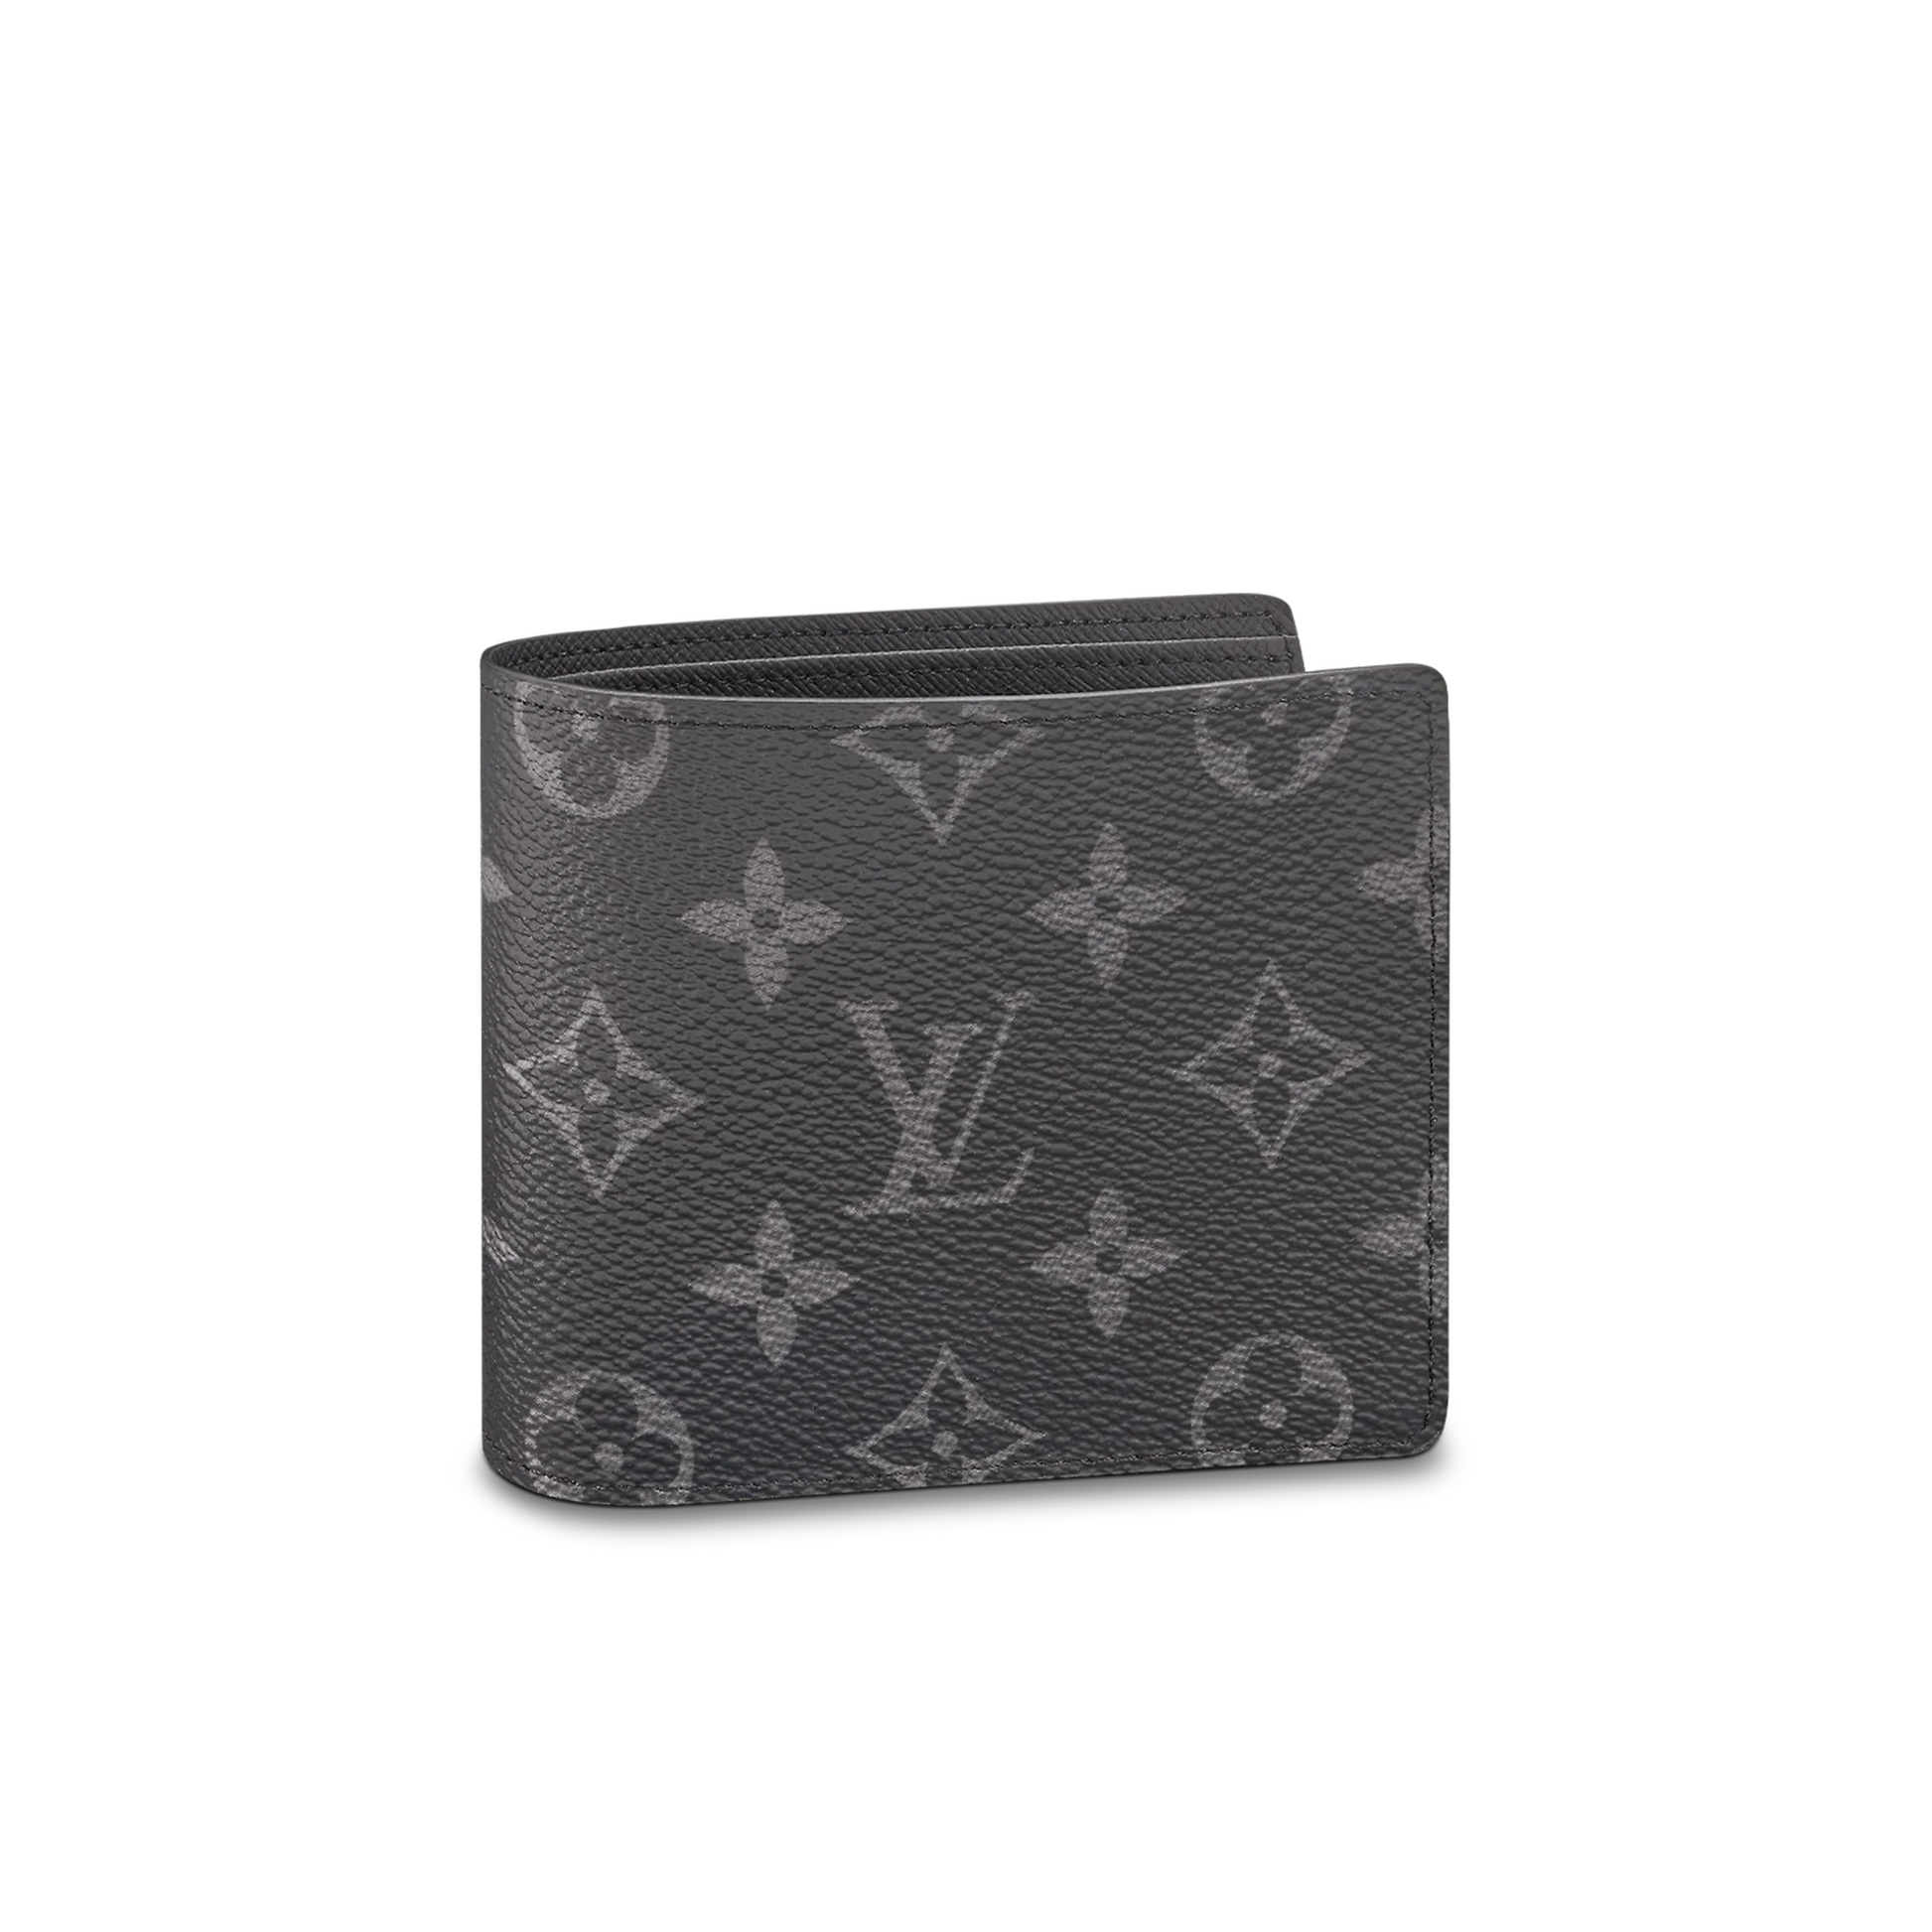 LOUIS VUITTON WALLET ( 1 NGĂN ) – Blank Room